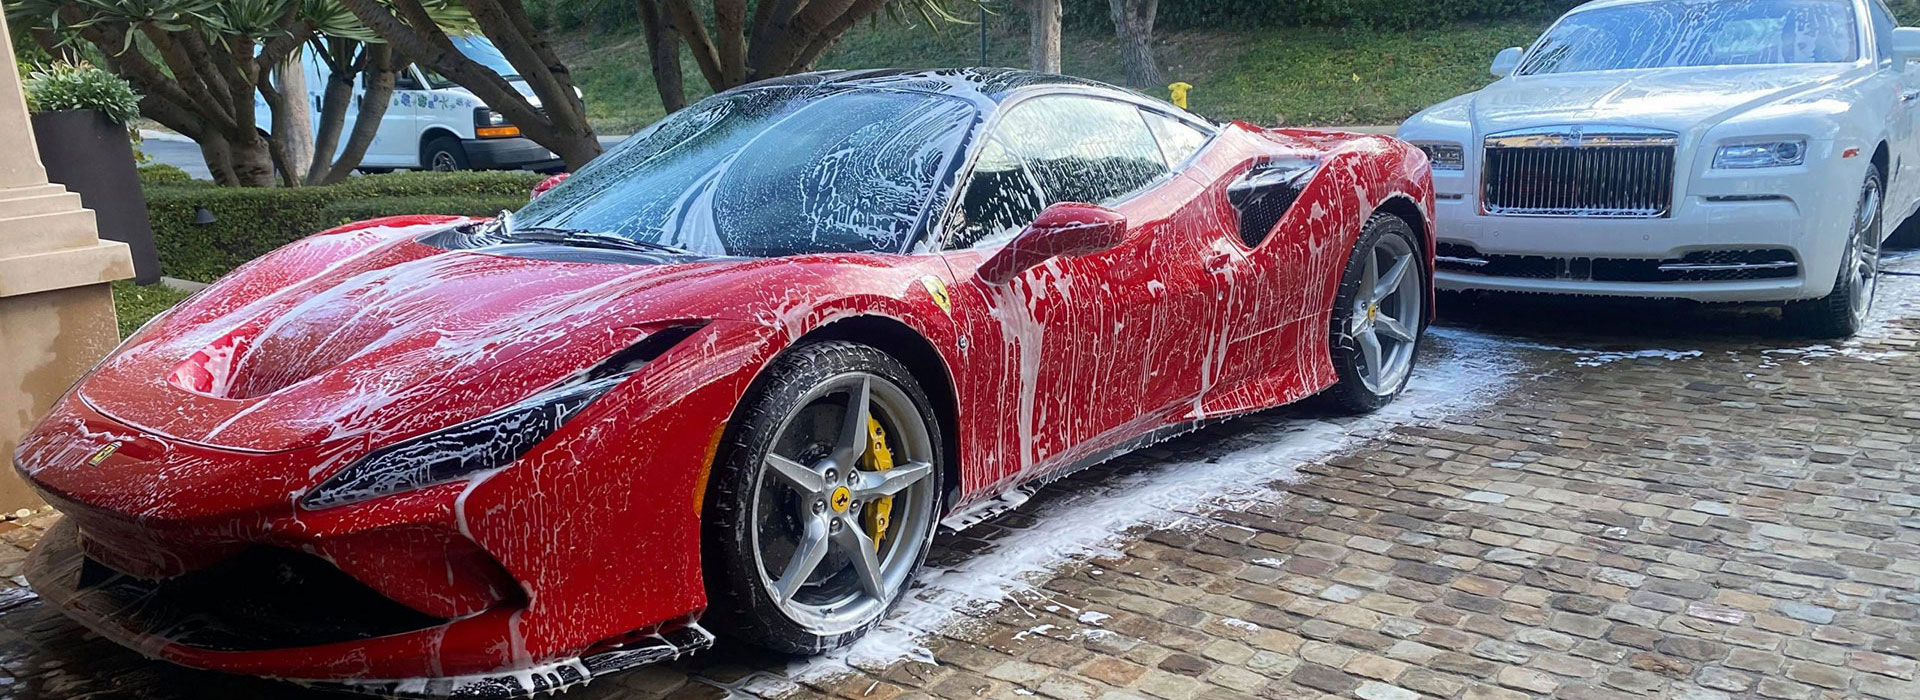 The Ultimate Guide to Deep Cleaning and Ceramic Coating Your Car